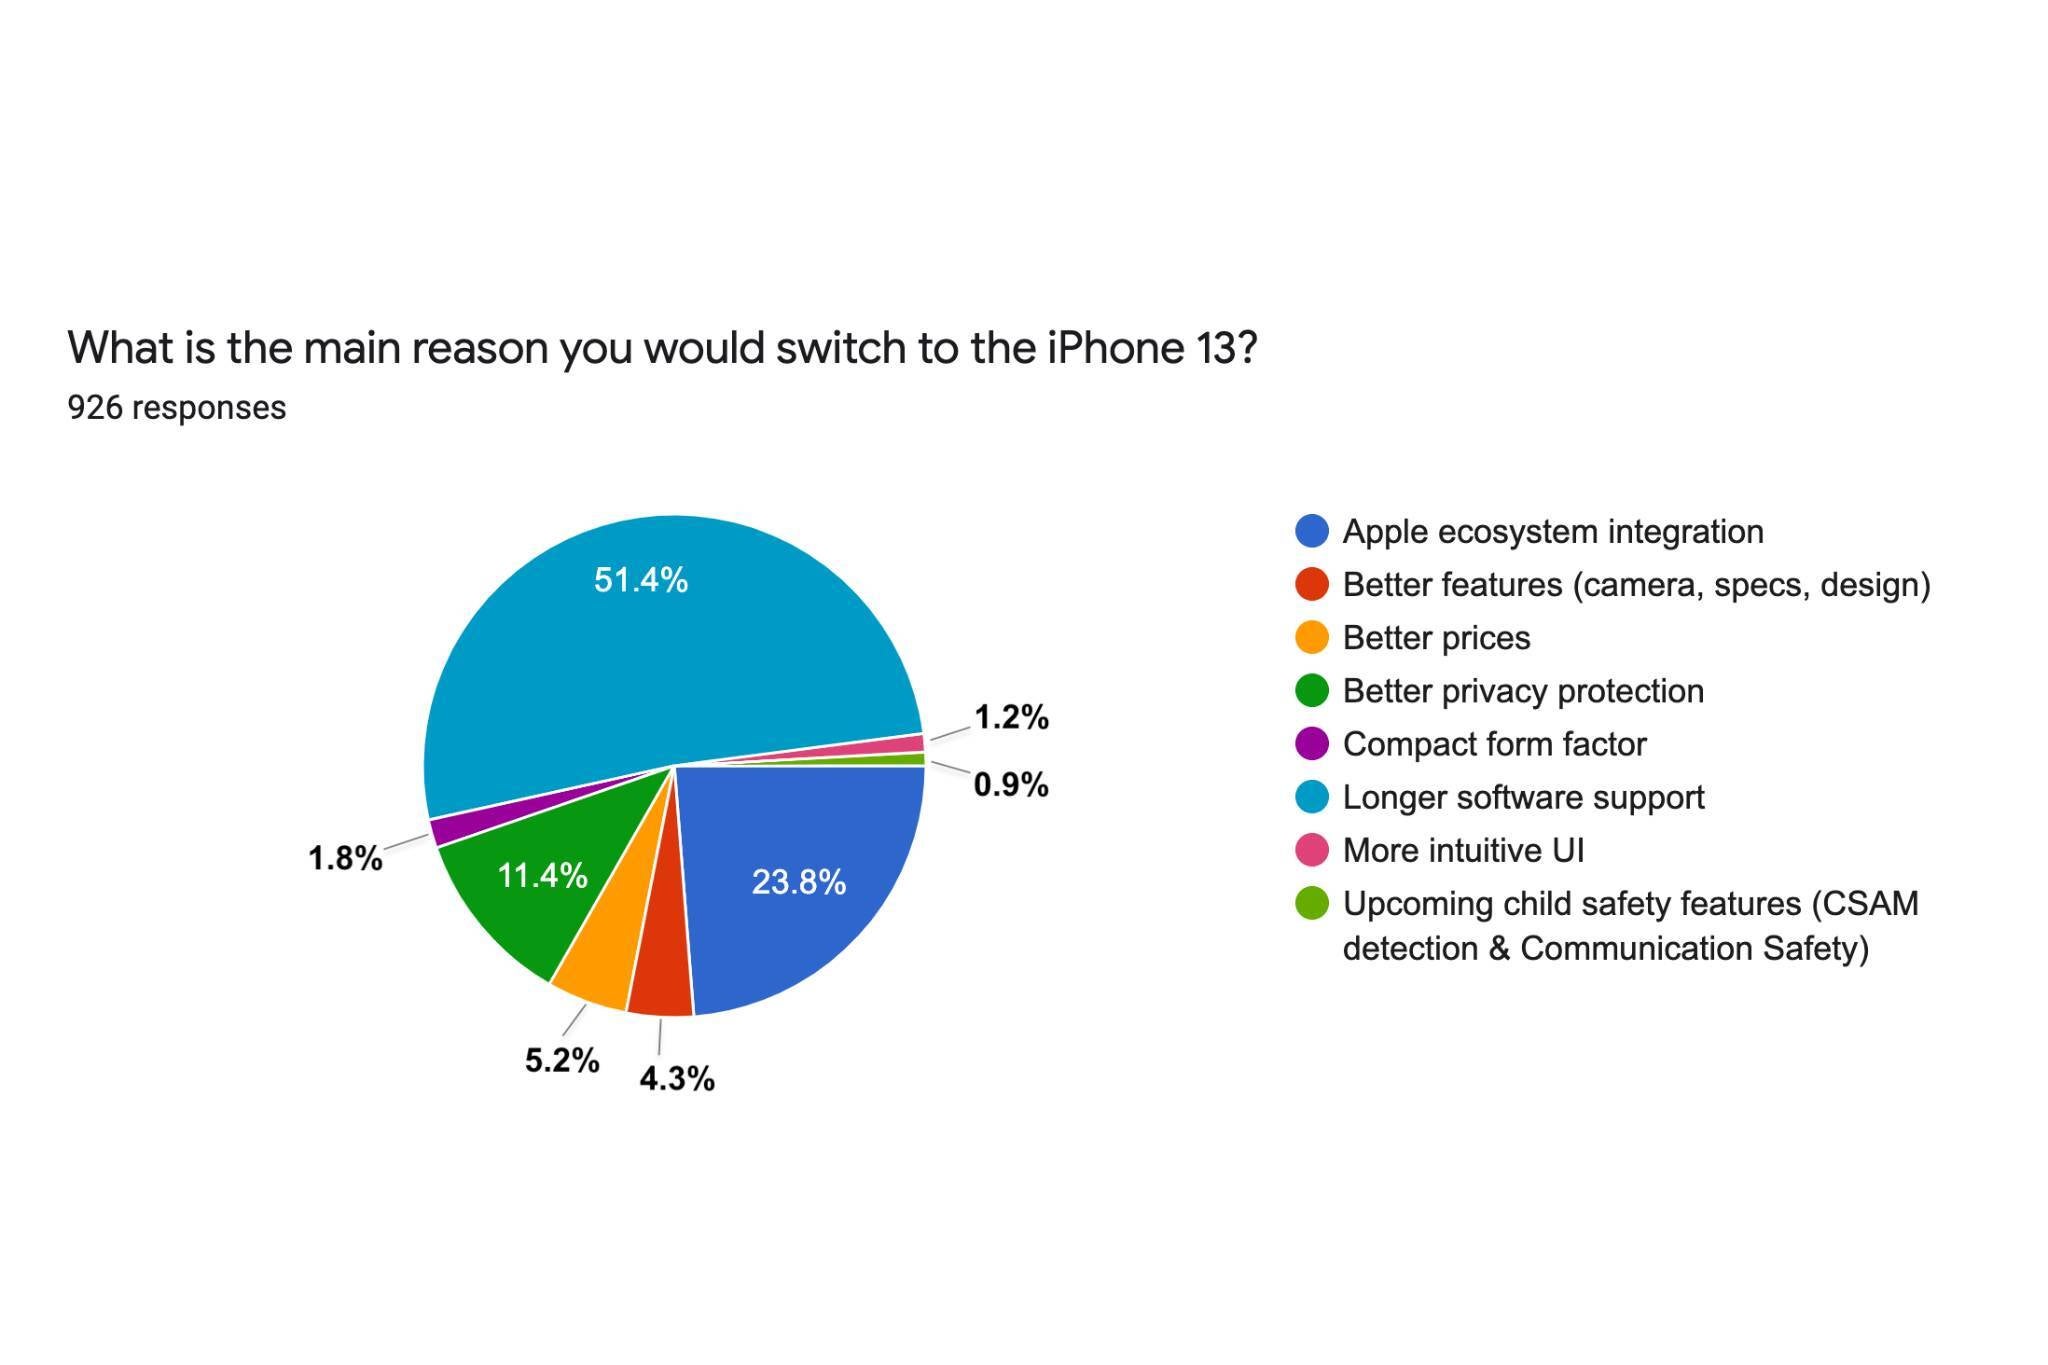 These iPhone 13 features could make some Android users switch - 82% of Android users not interested in iPhone 13, chiefly because of no Touch ID and iOS restrictions